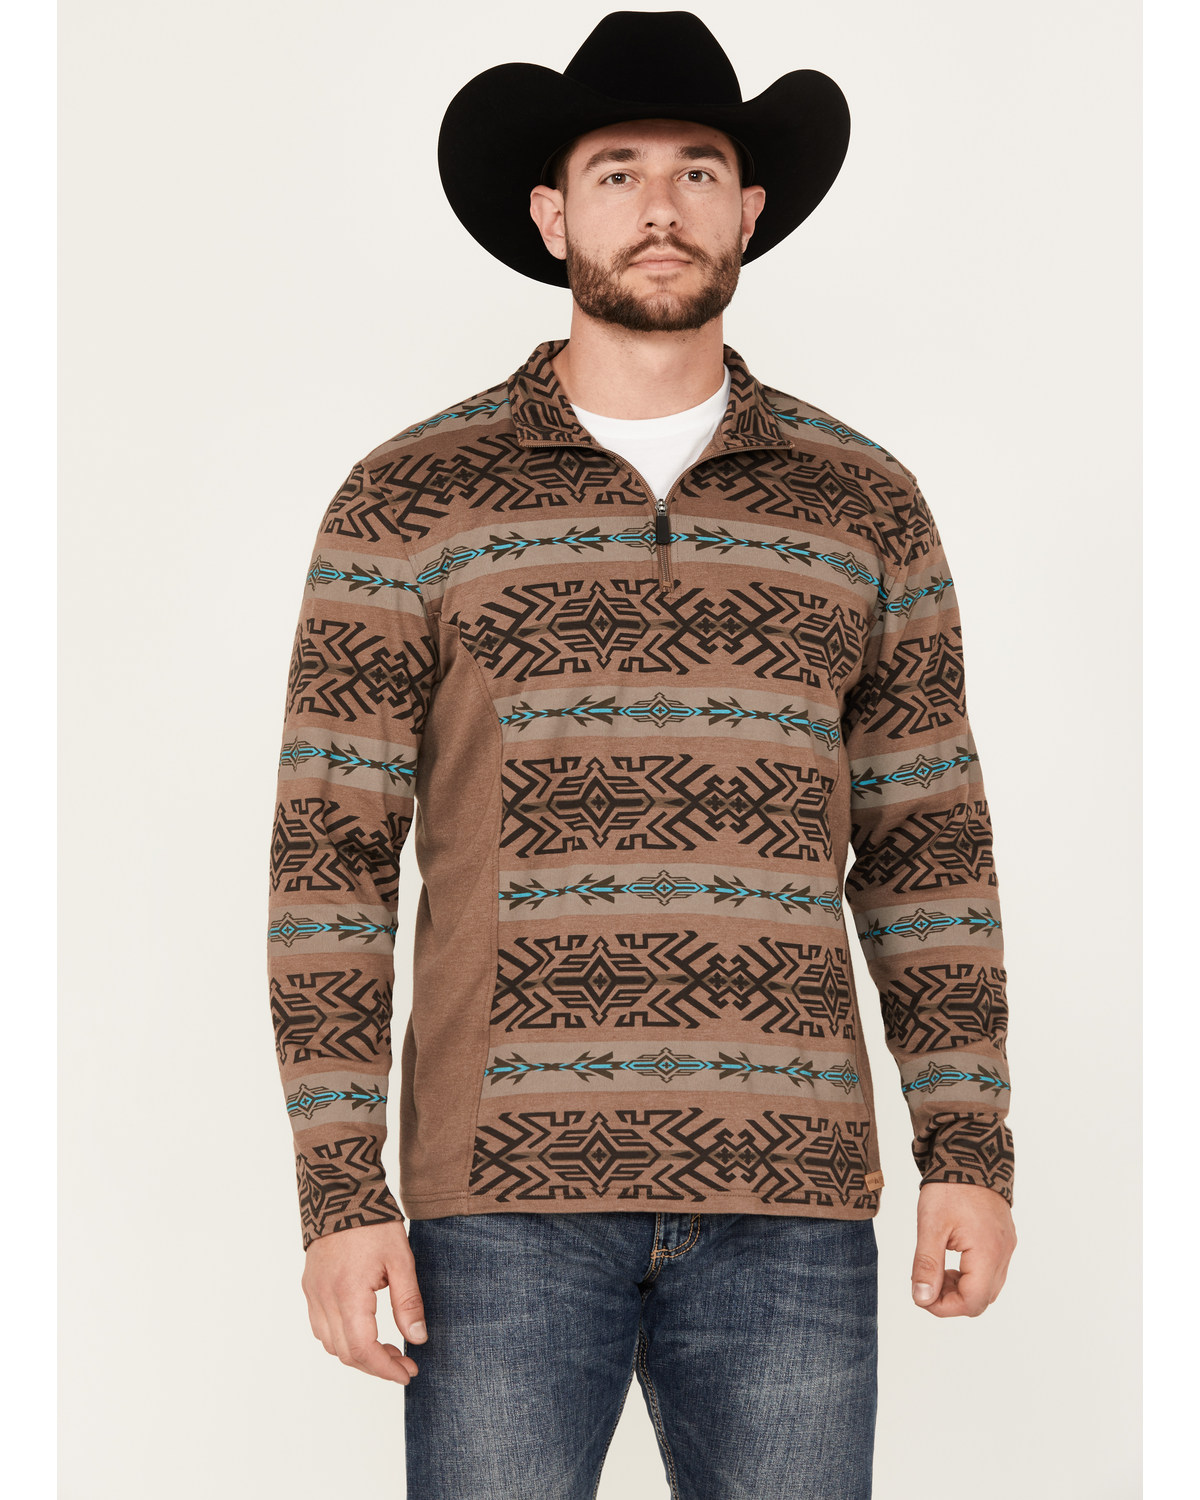 Powder River Outfitters by Panhandle Men's Pro Southwestern 1/4 Zip Henley Long Sleeve Shirt